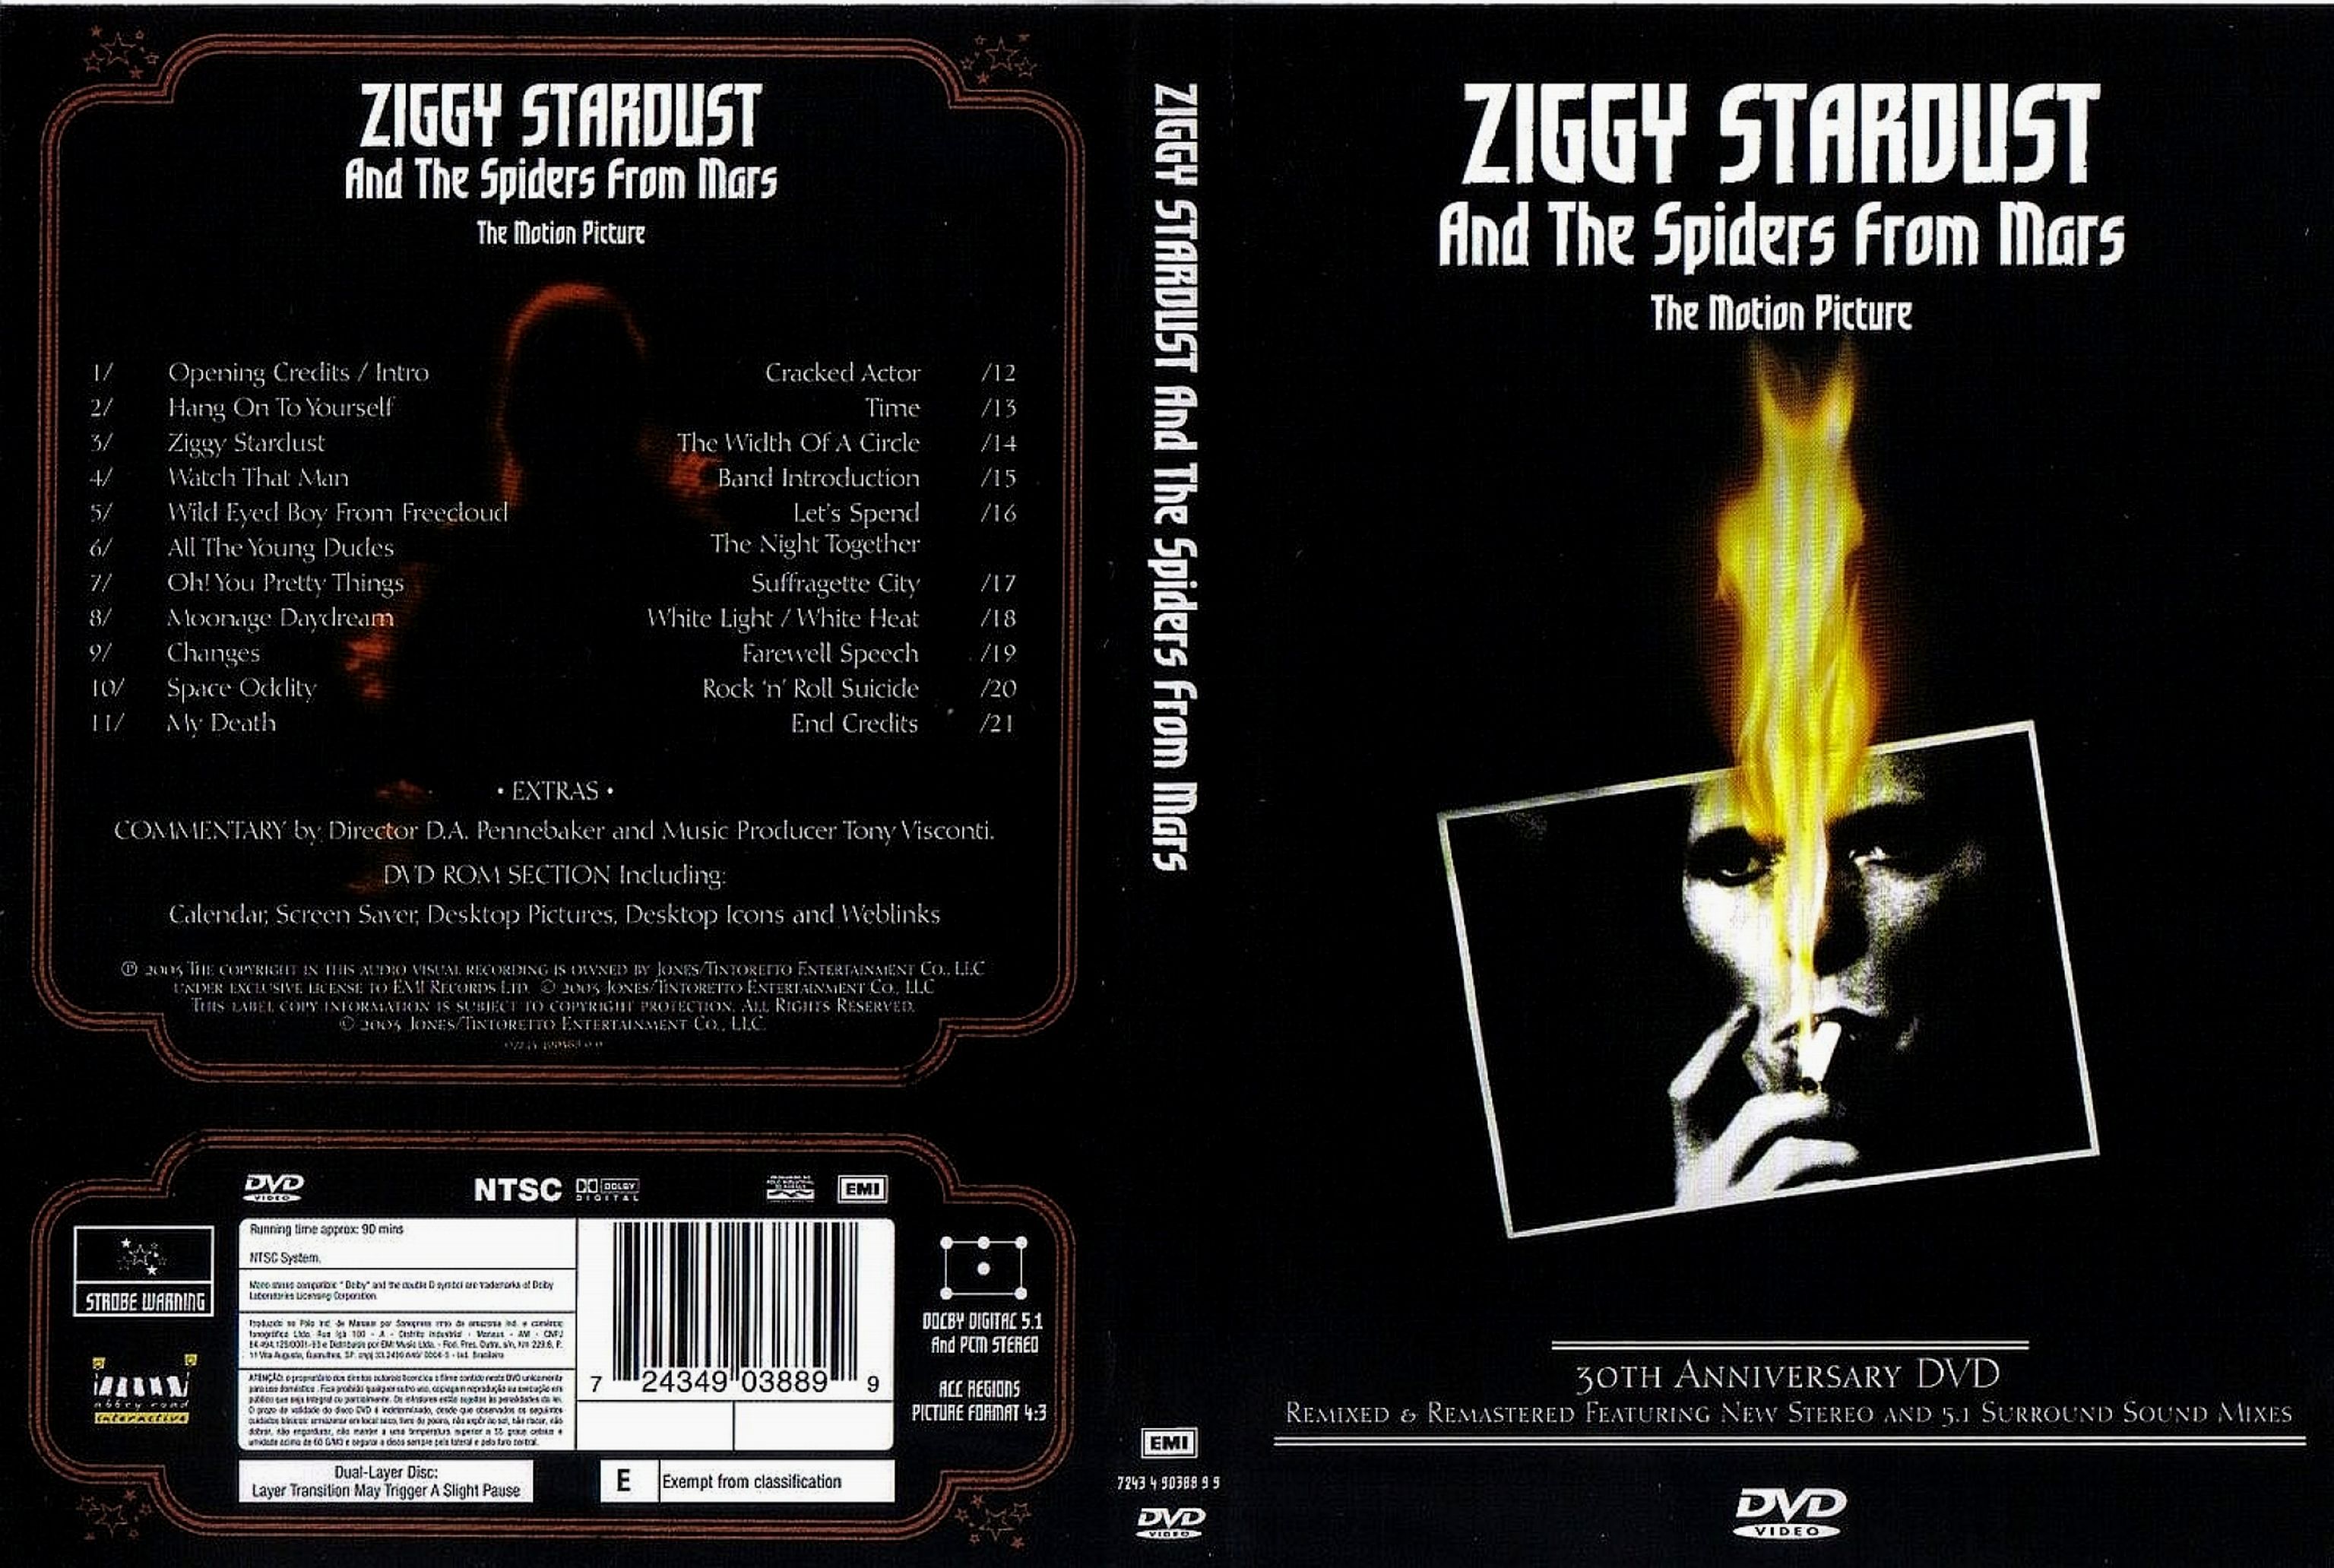 Jaquette DVD David Bowie - Ziggy Stardust and the spider from Mars the motion picture 